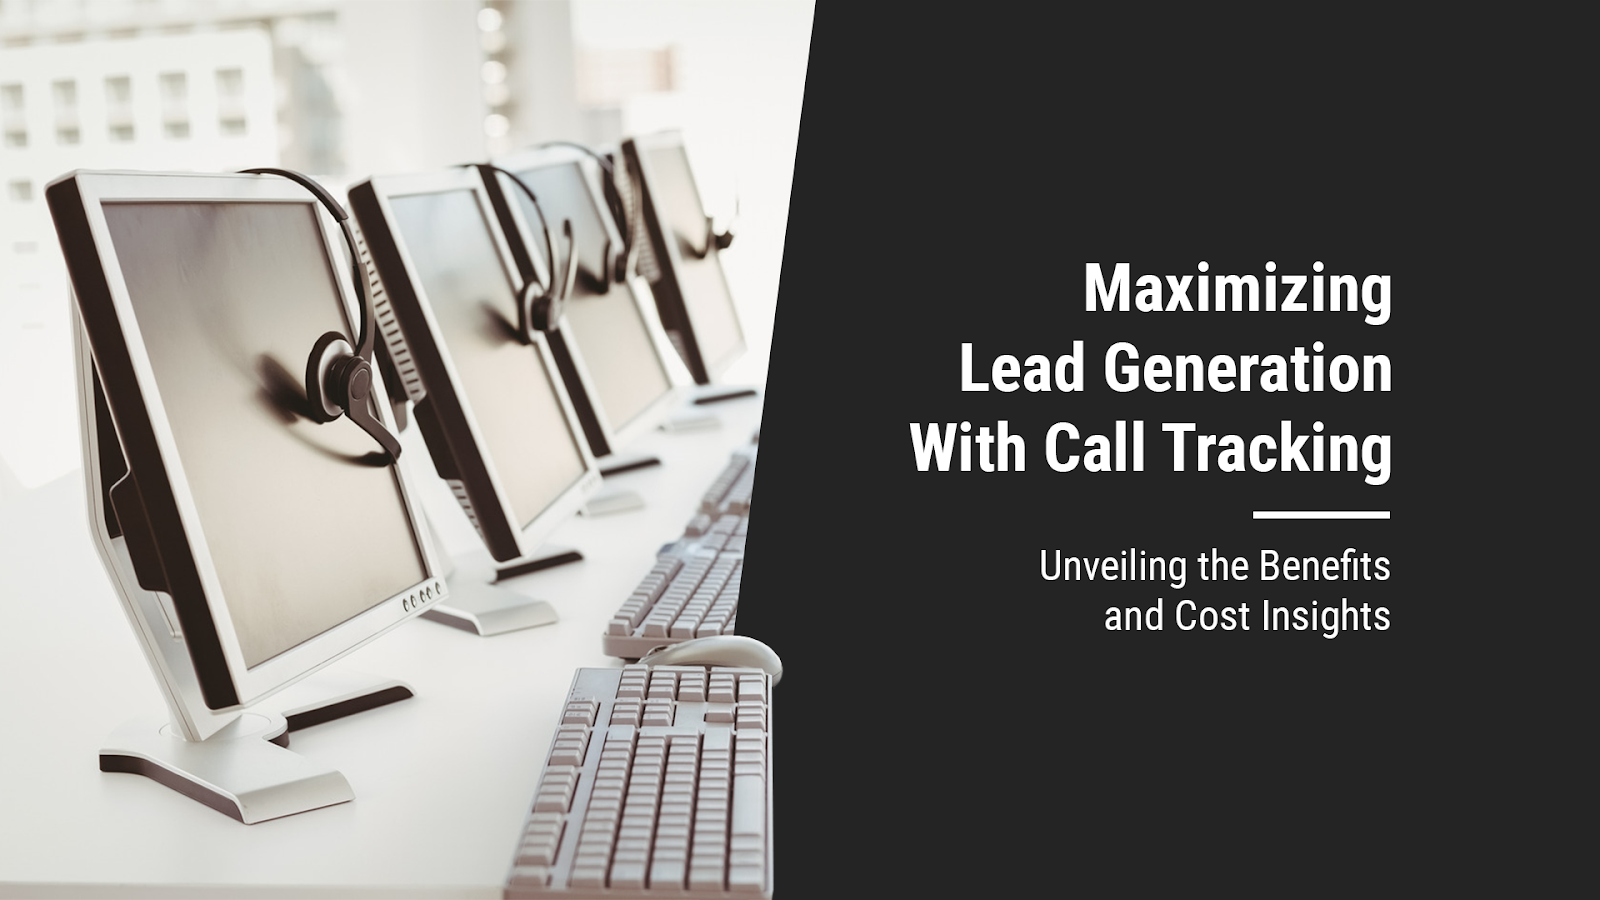 Maximizing Lead Generation with Call Tracking: Unveiling the Benefits and Cost Insights